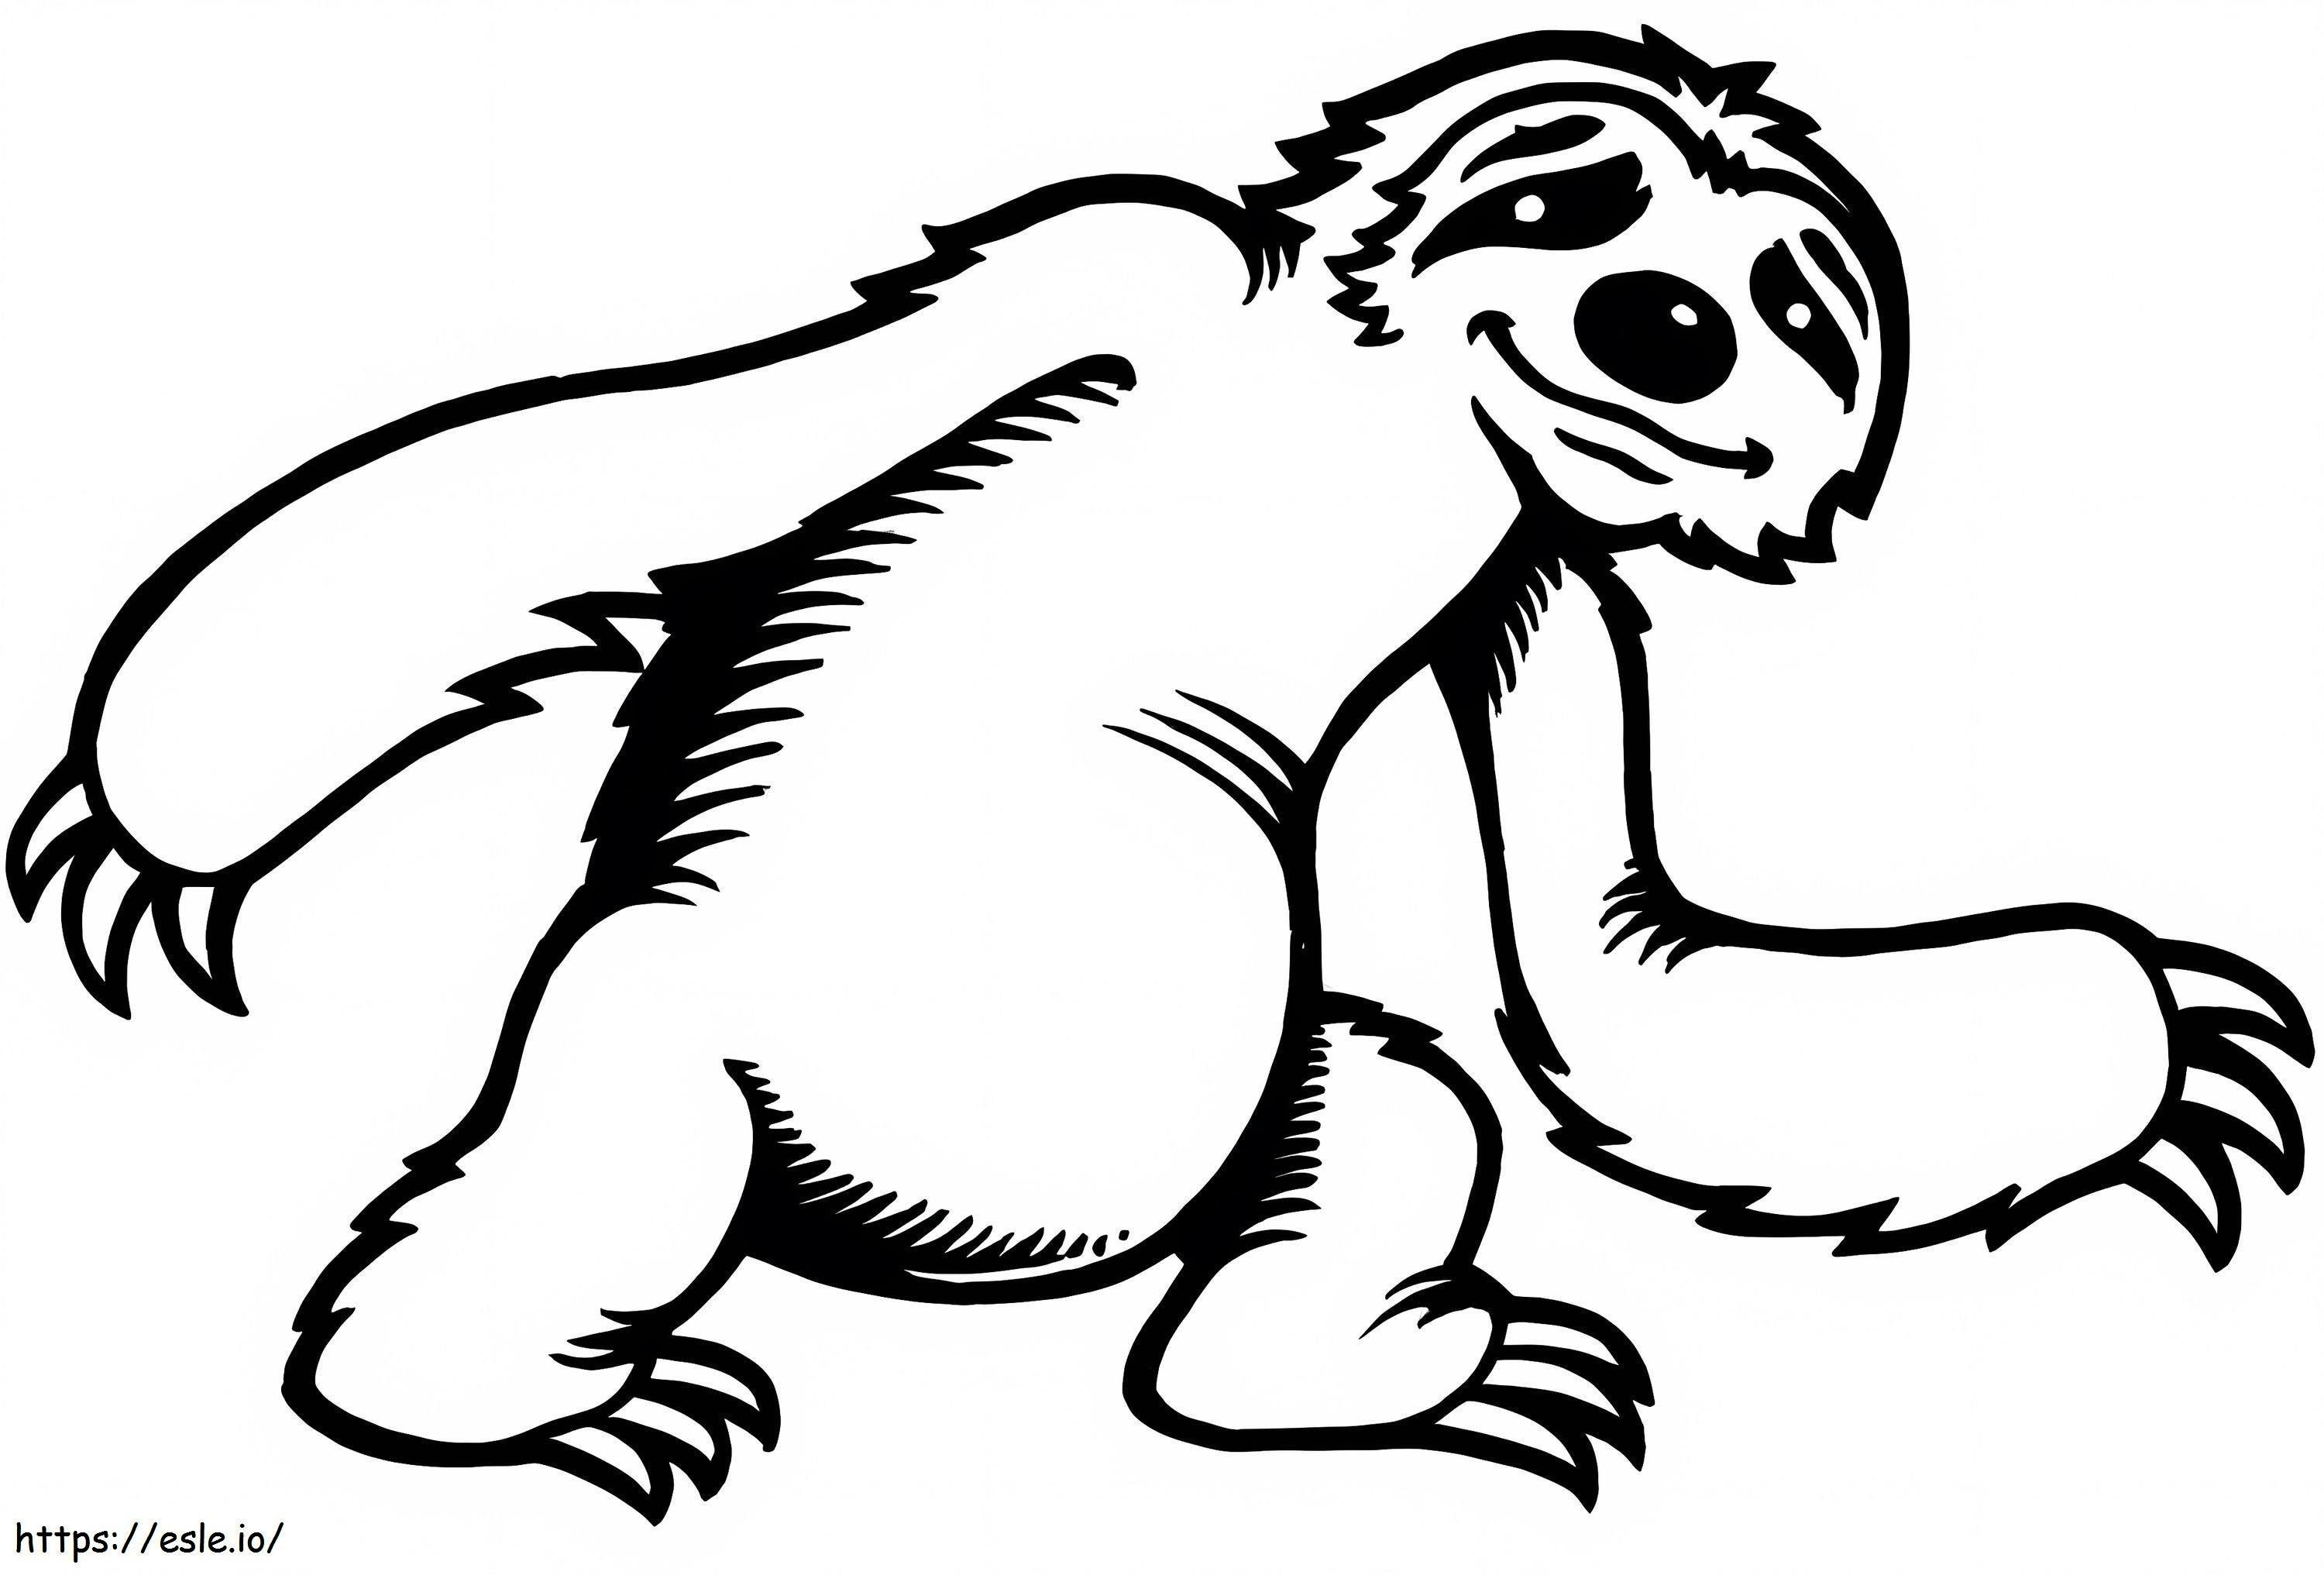 Sloth 4 coloring page